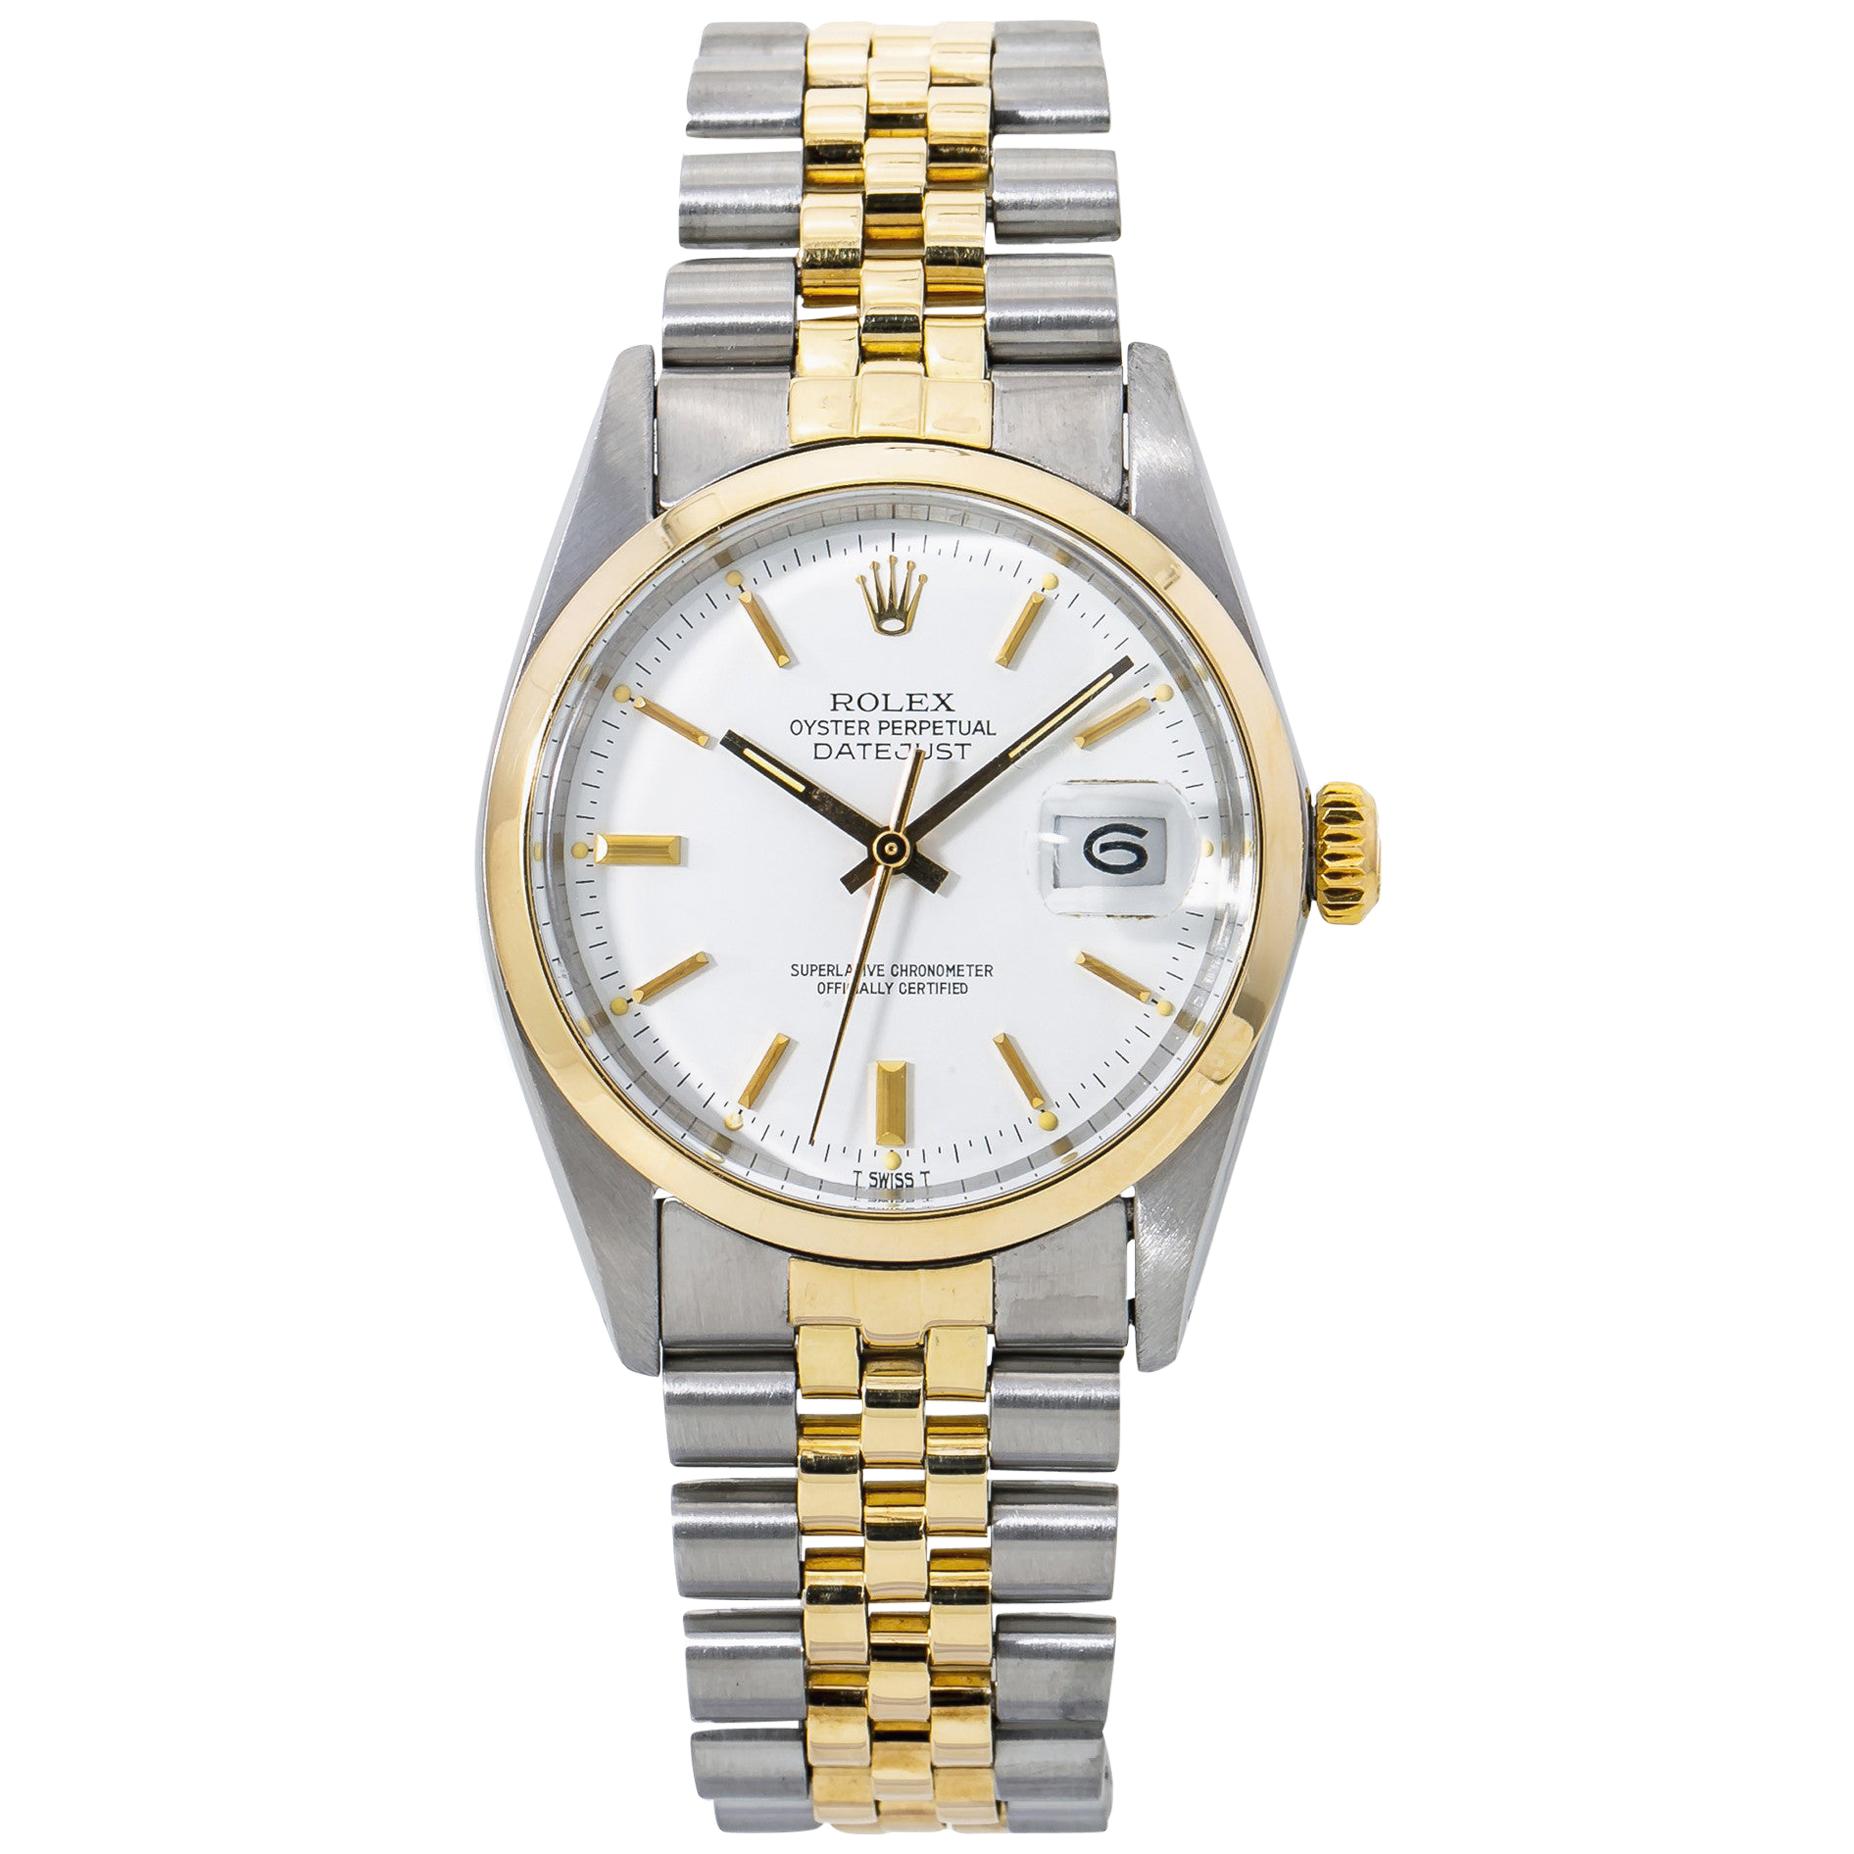 Rolex Datejust 16003 Vintage Rare White Men's Automatic Watch Two-Tone For Sale